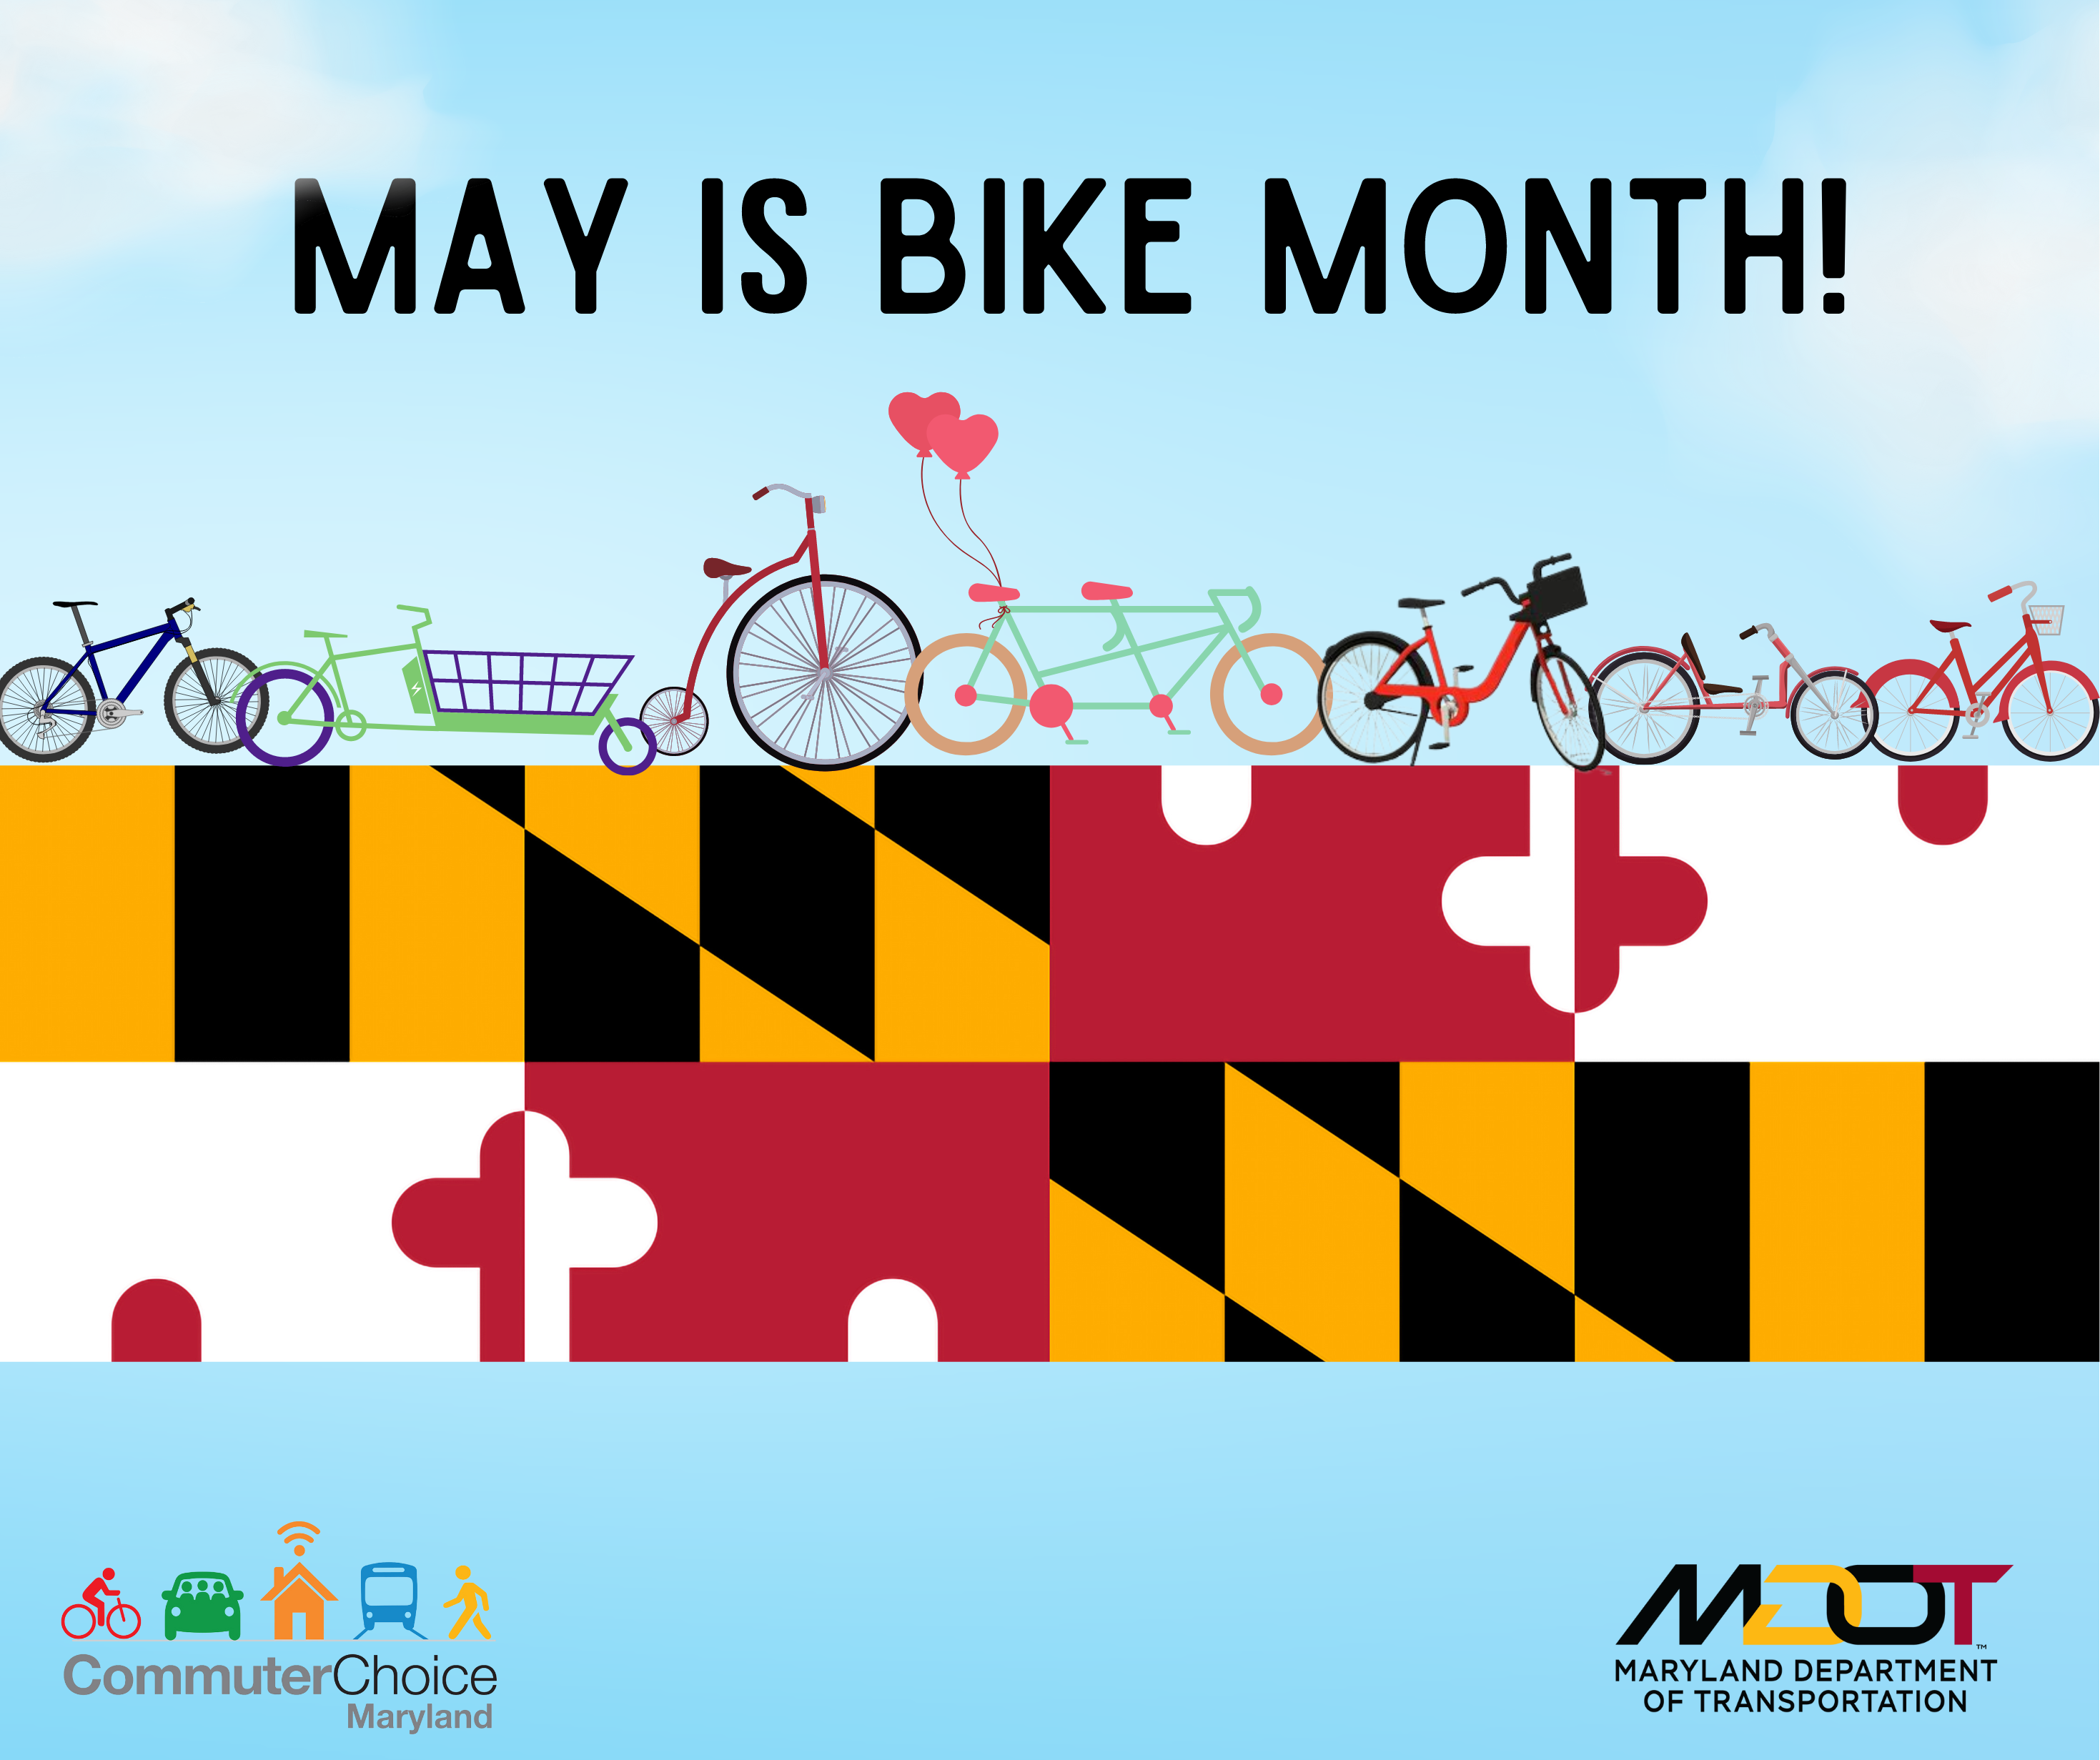 May is Bike Month image of bikes on Maryland flag